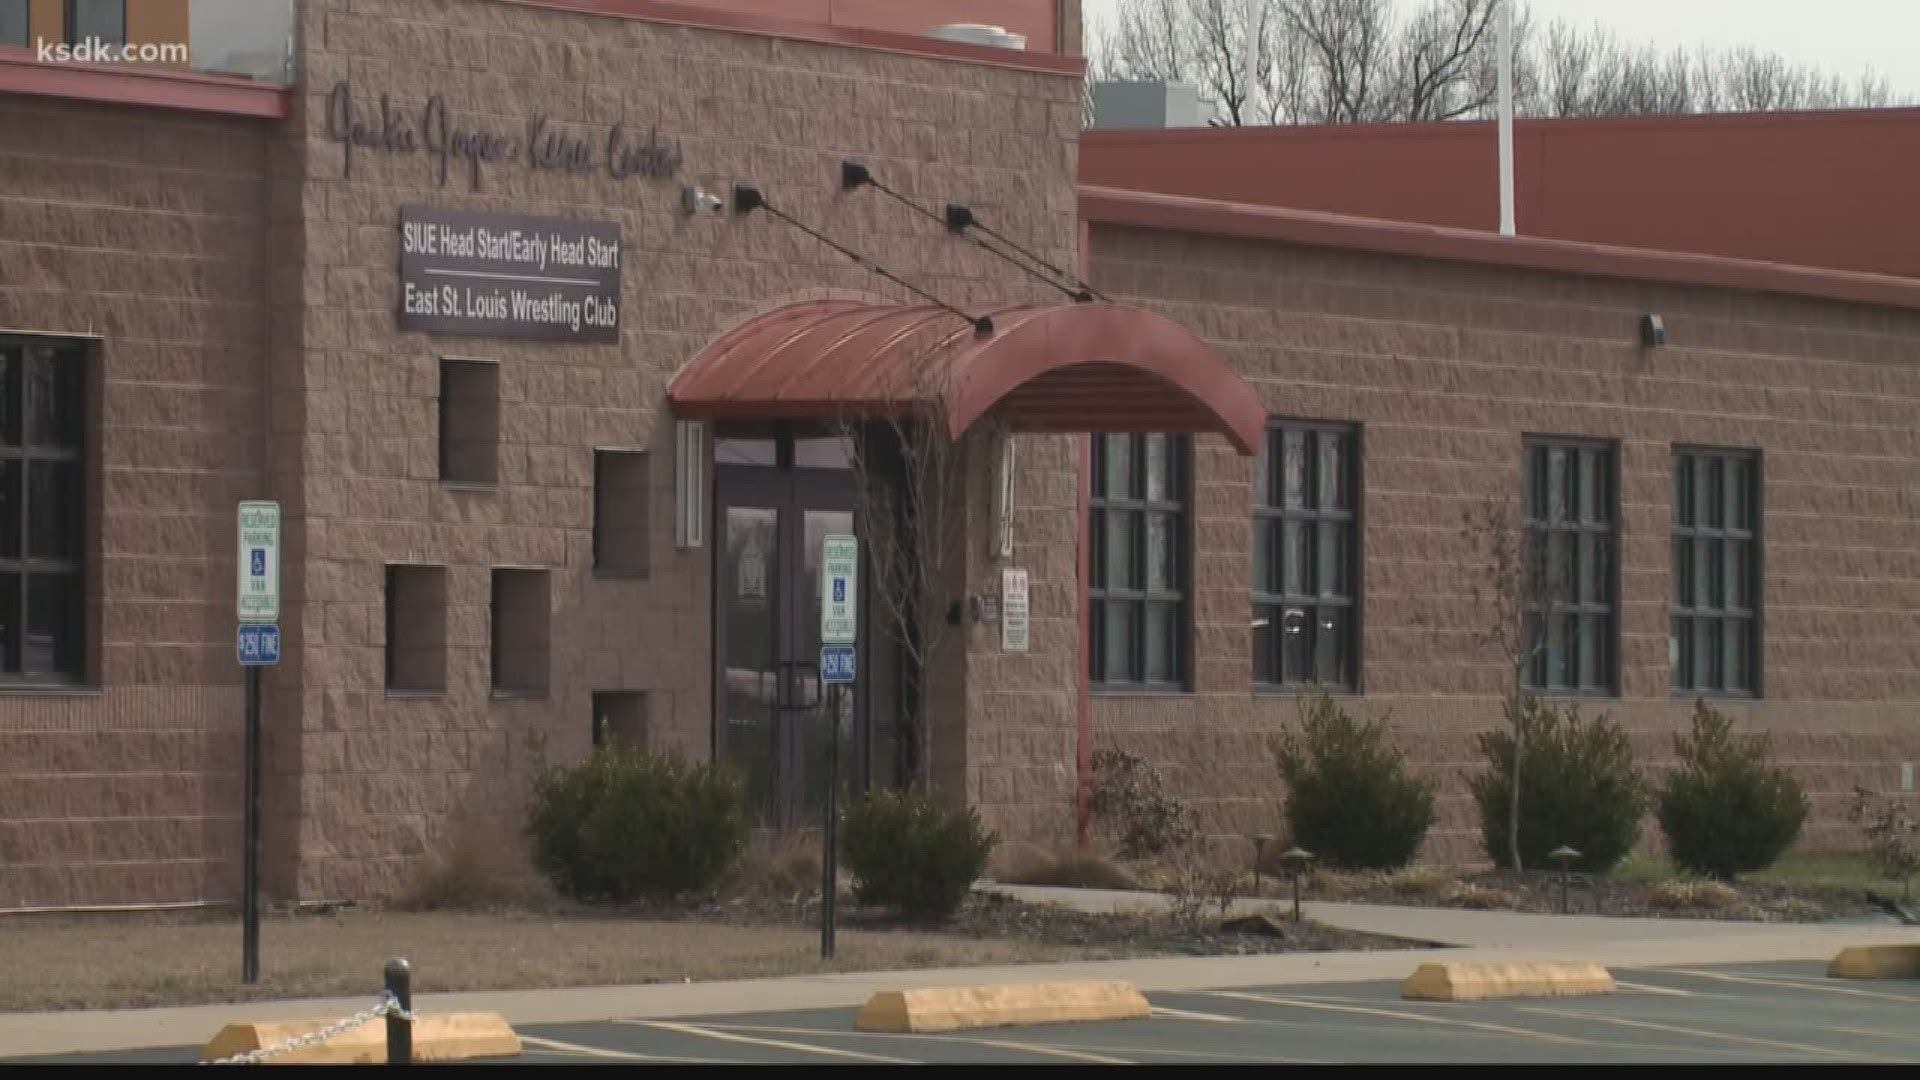 A teacher and her assistant are on leave and could face criminal charges, after police said they forced pre-schoolers to strip down and stand in naked in a closet as punishment.